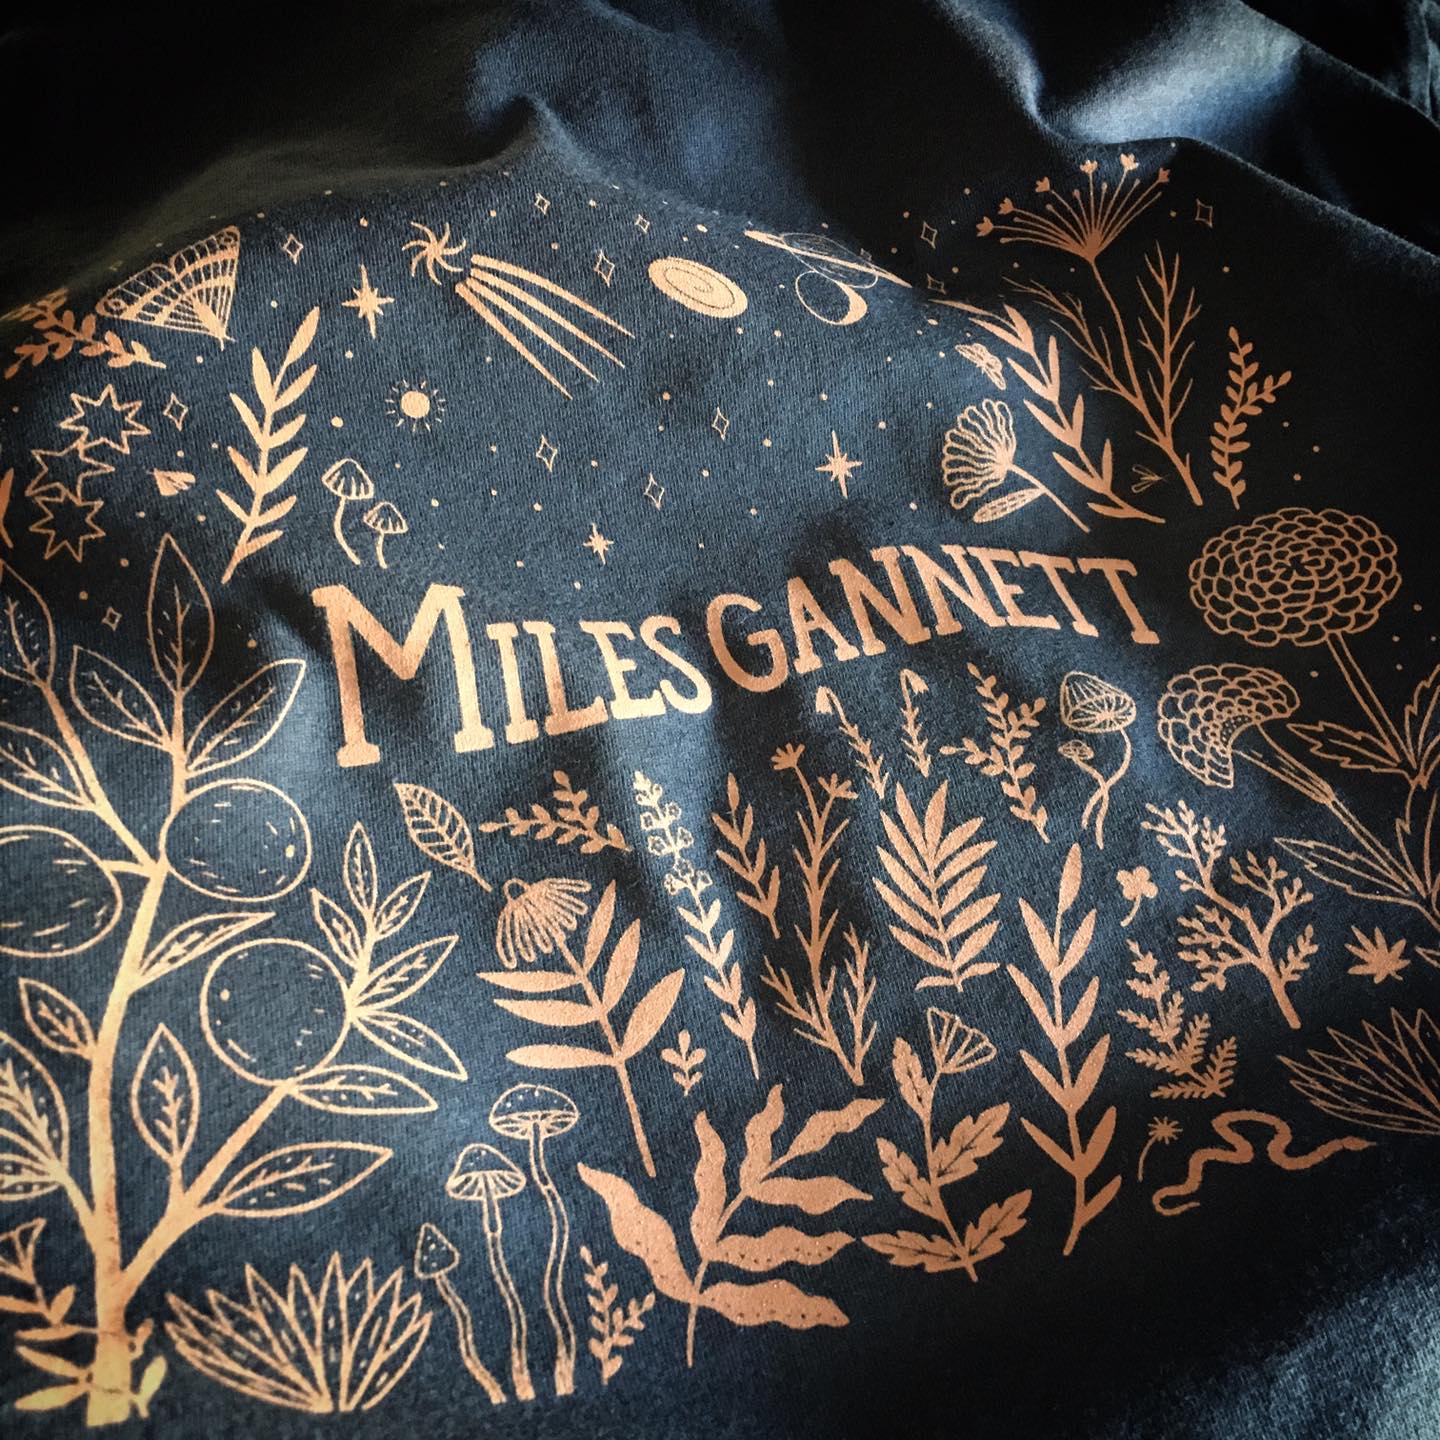 Screen printed t-shirt design by Brain Flower Designs for Miles Gannett, printed by RVA Threads. 